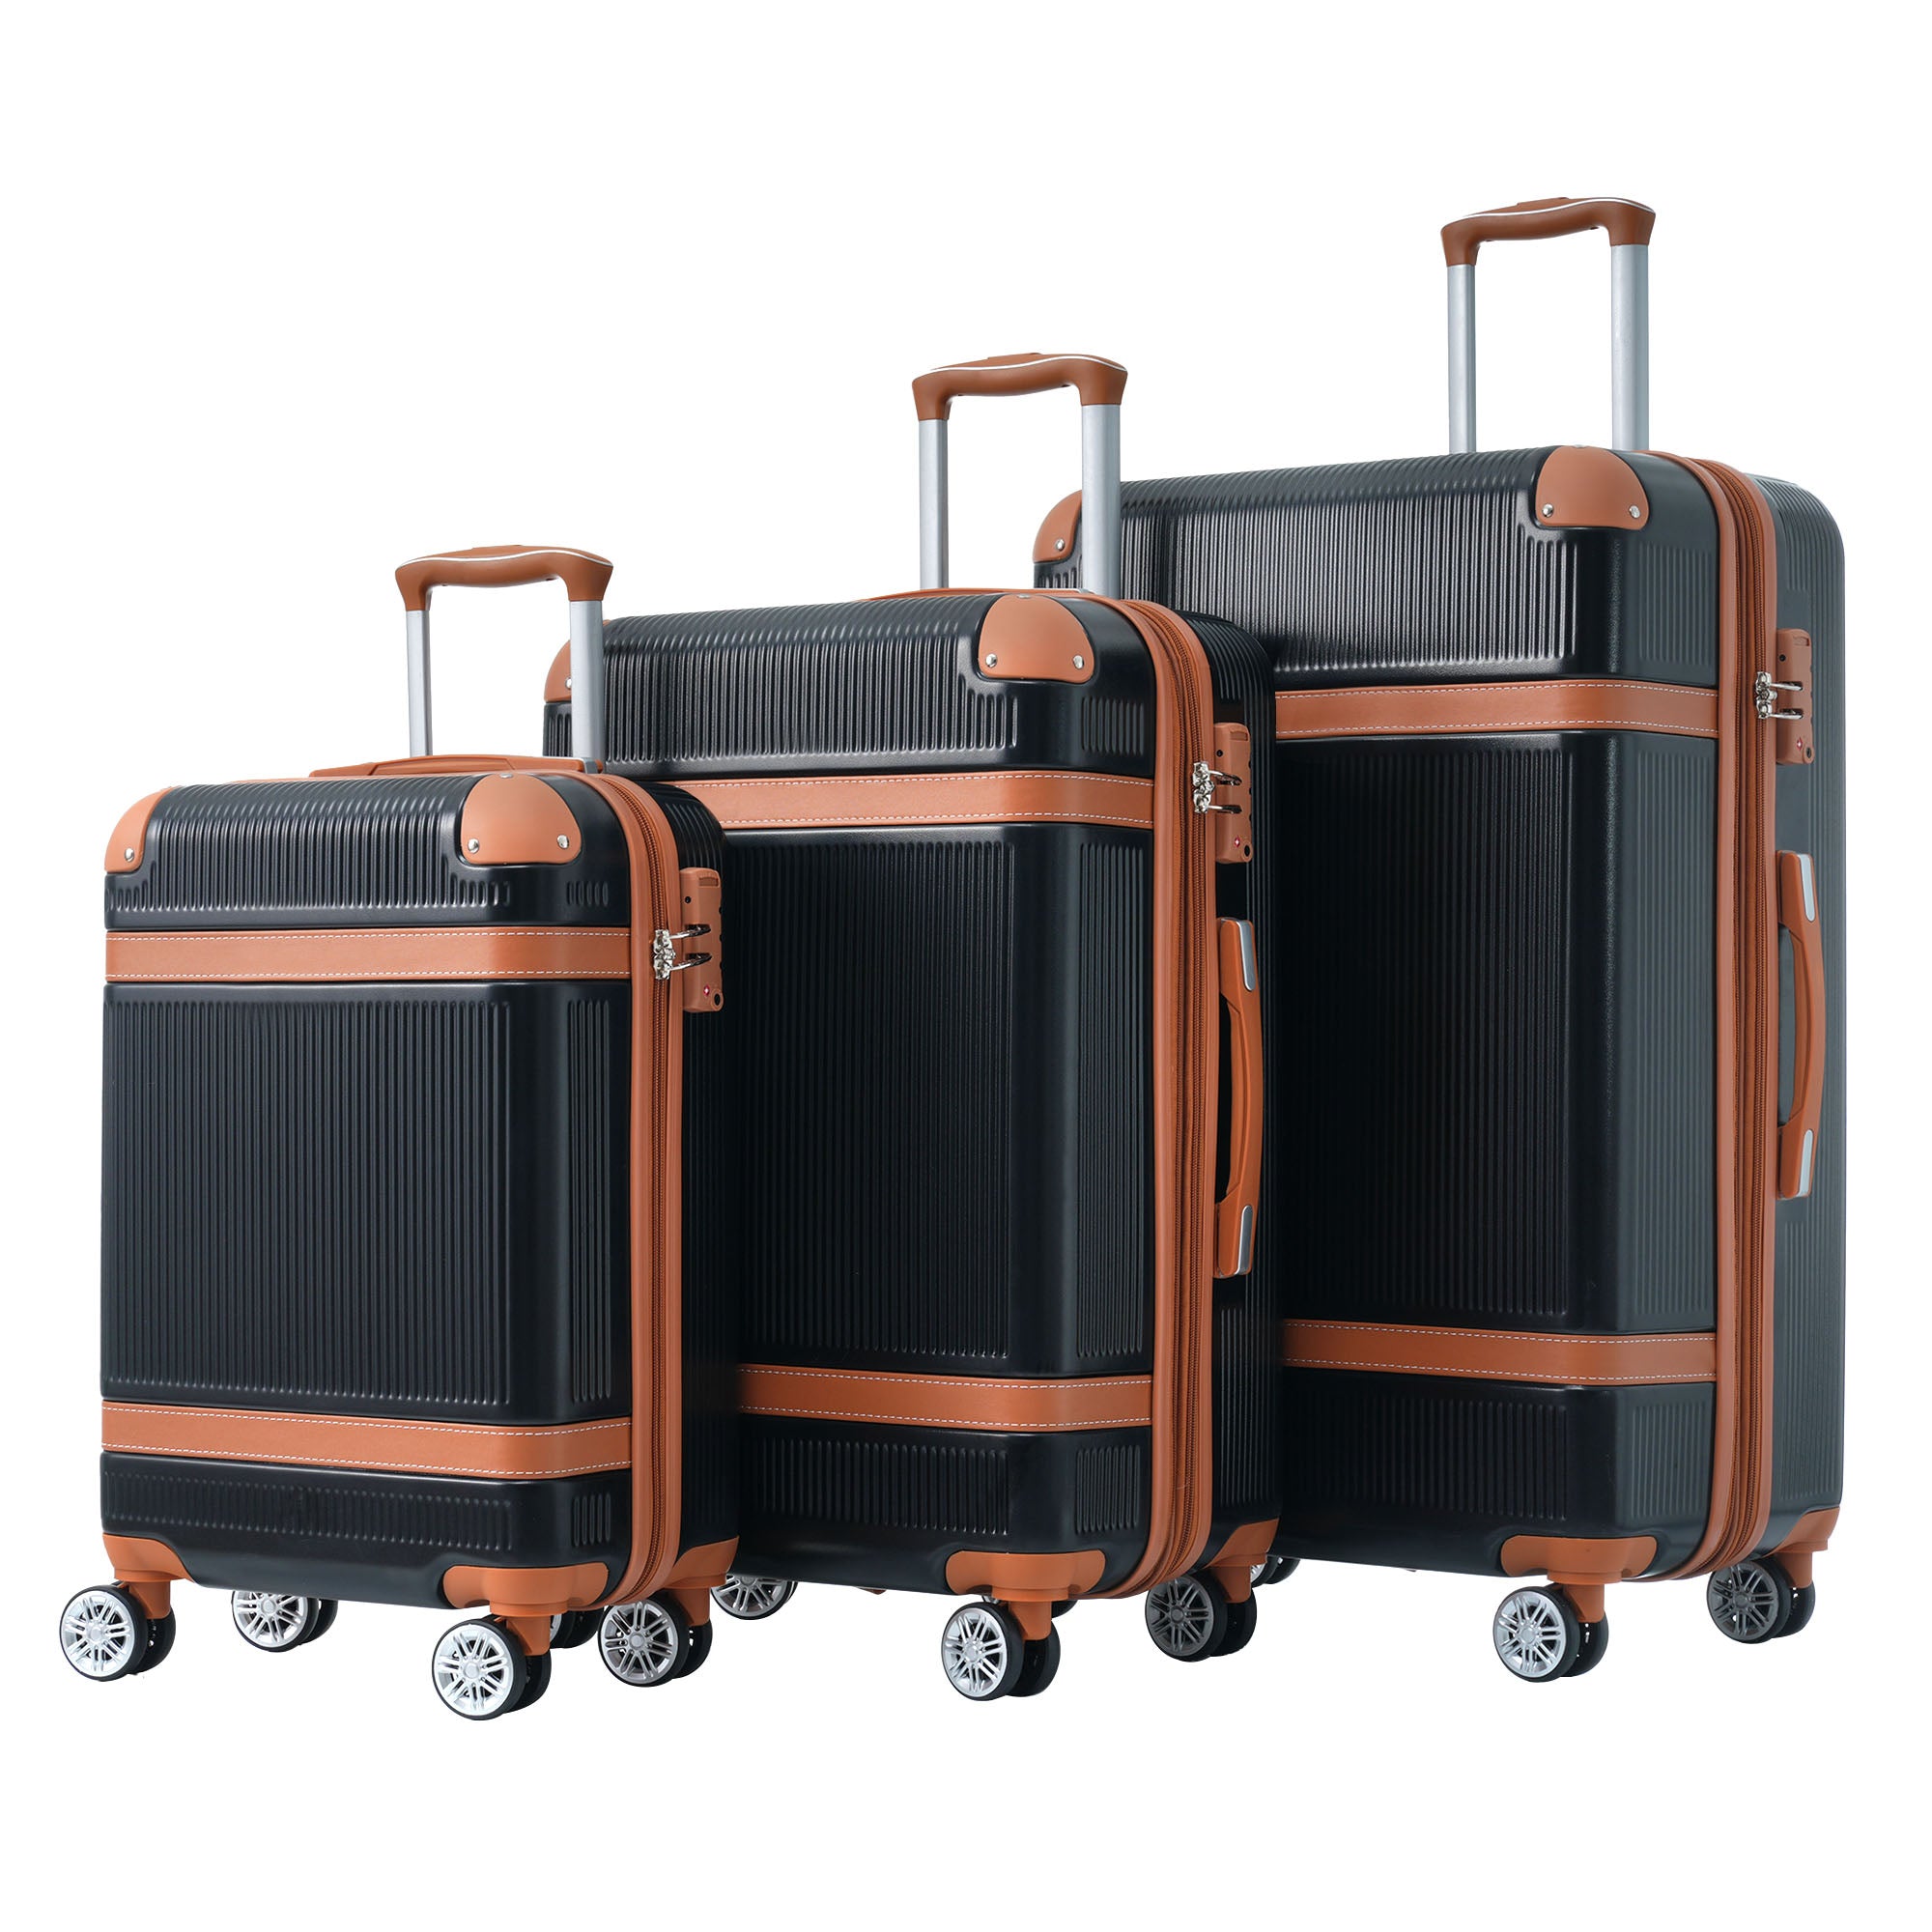 Hardshell Luggage Sets 3 Piece double spinner 8 wheels black-abs